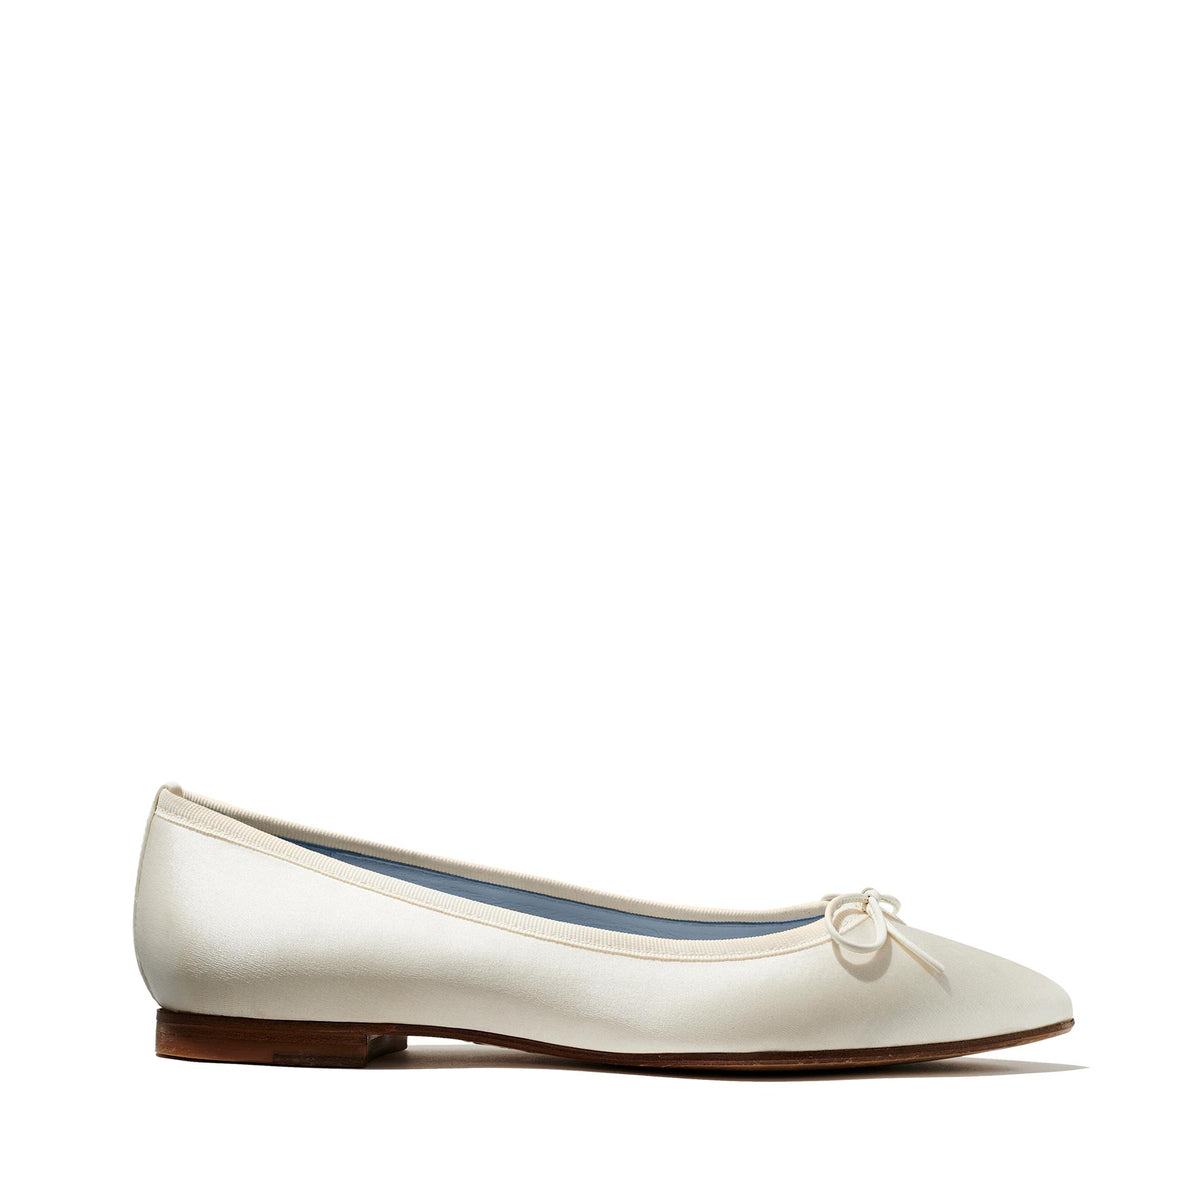 The Pointe in Ivory Satin